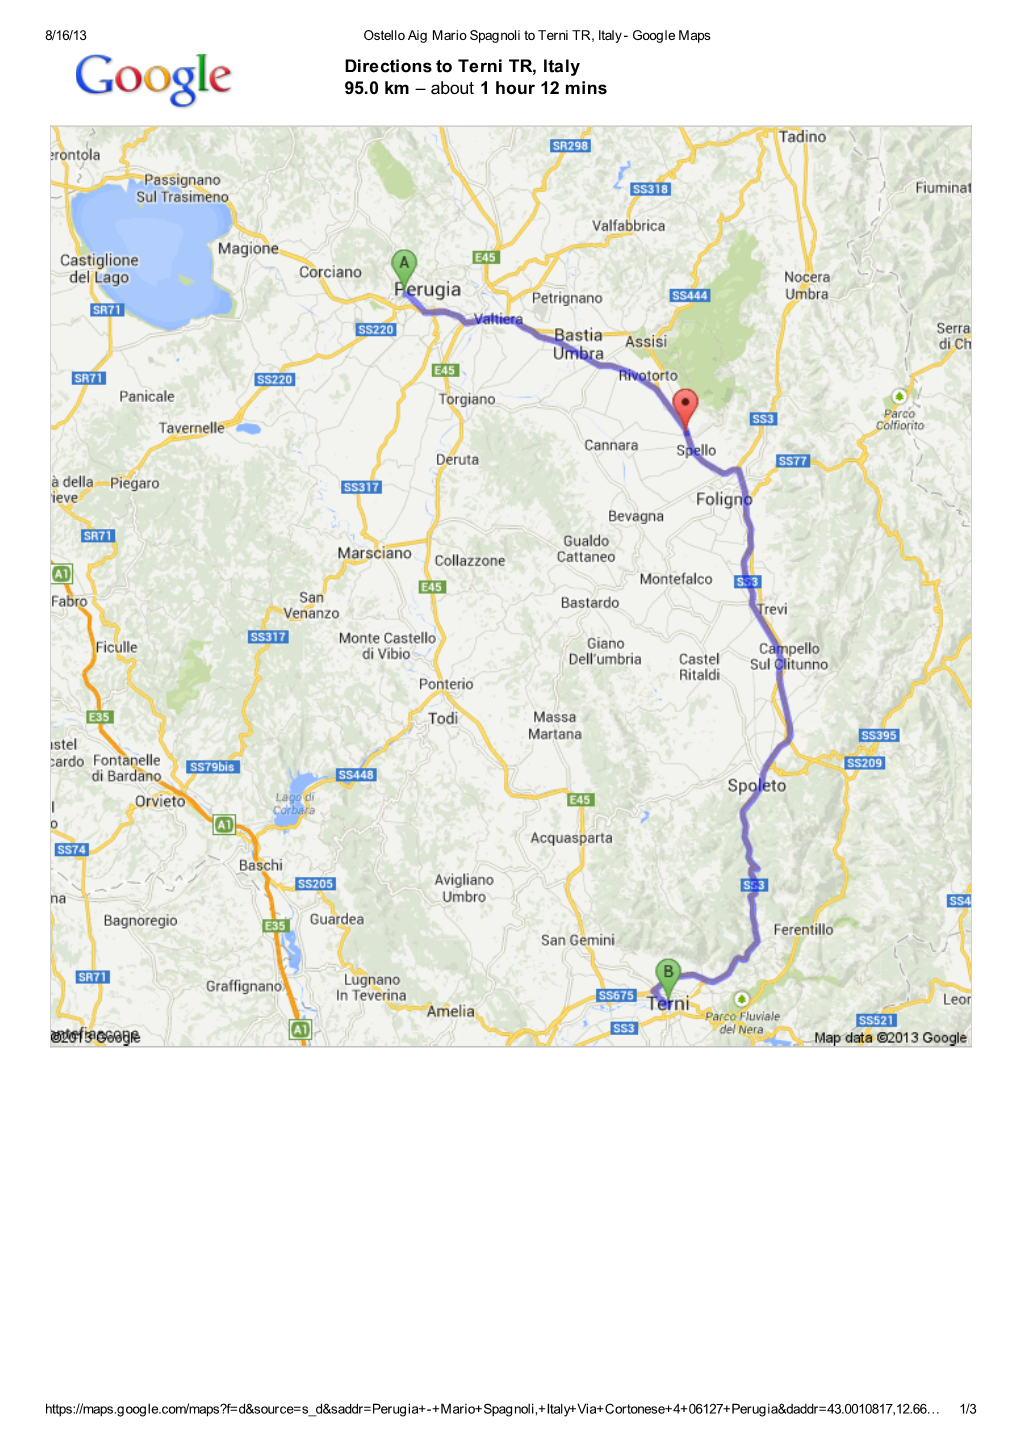 Directions to Terni TR, Italy 95.0 Km – About 1 Hour 12 Mins